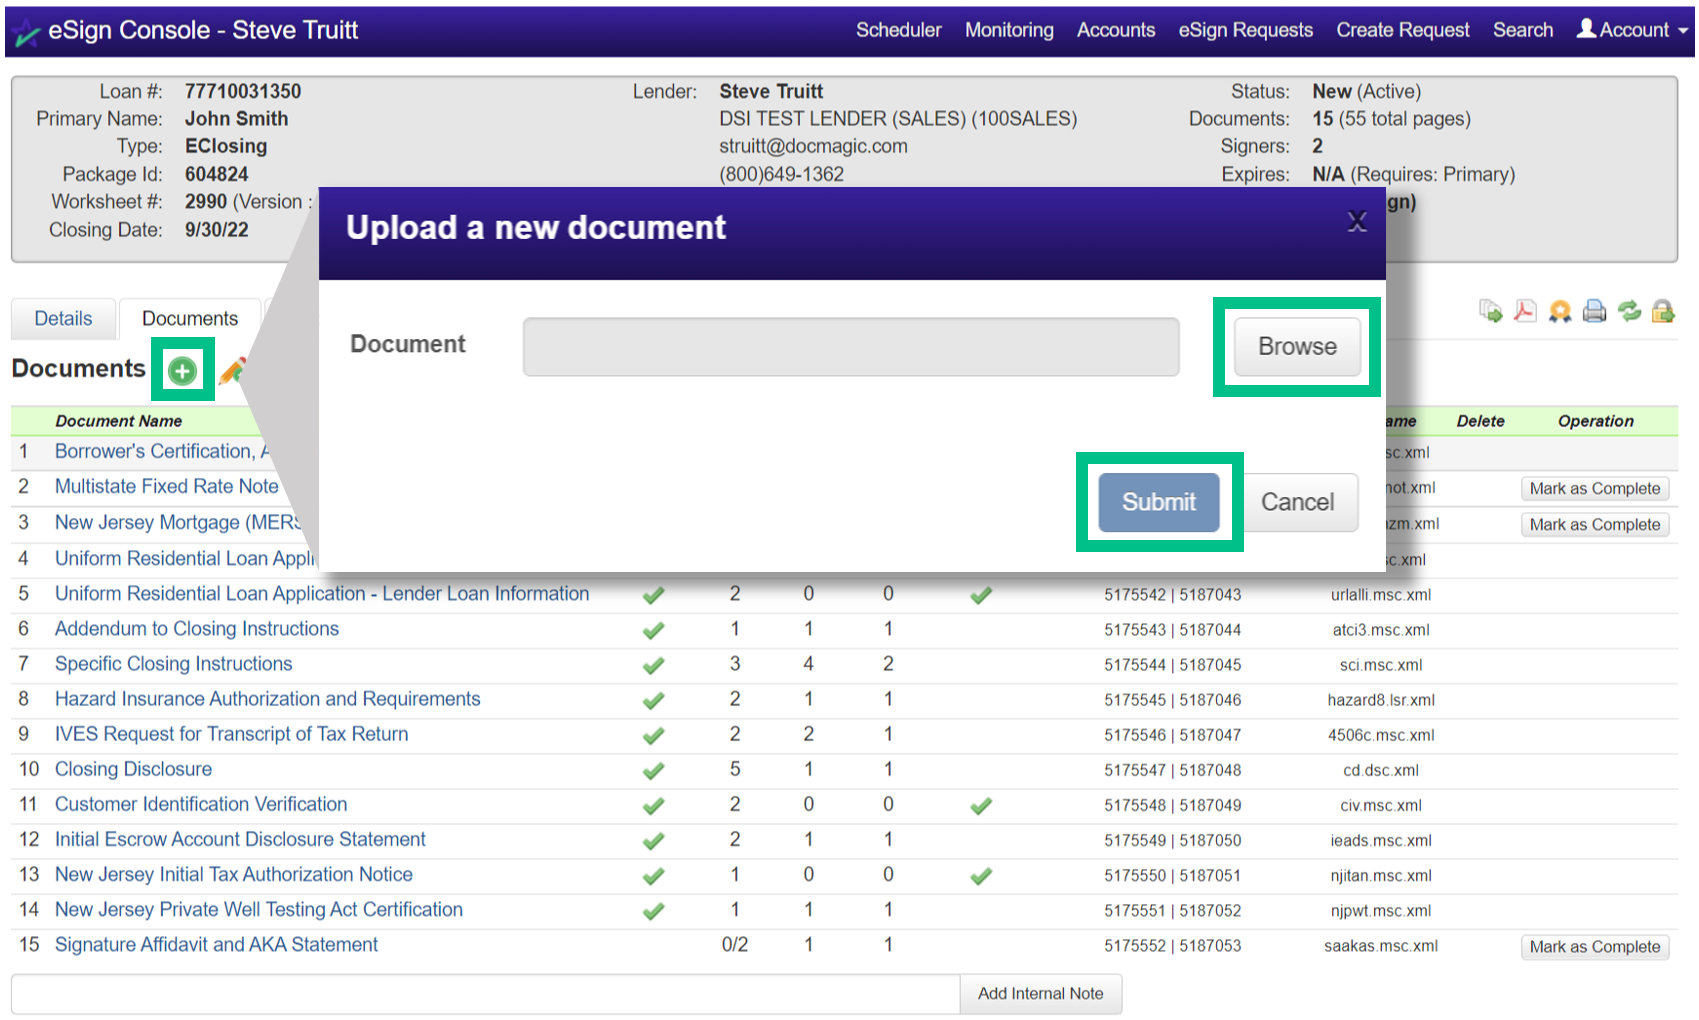 Screenshot of the eSign Console - Documents Add Document